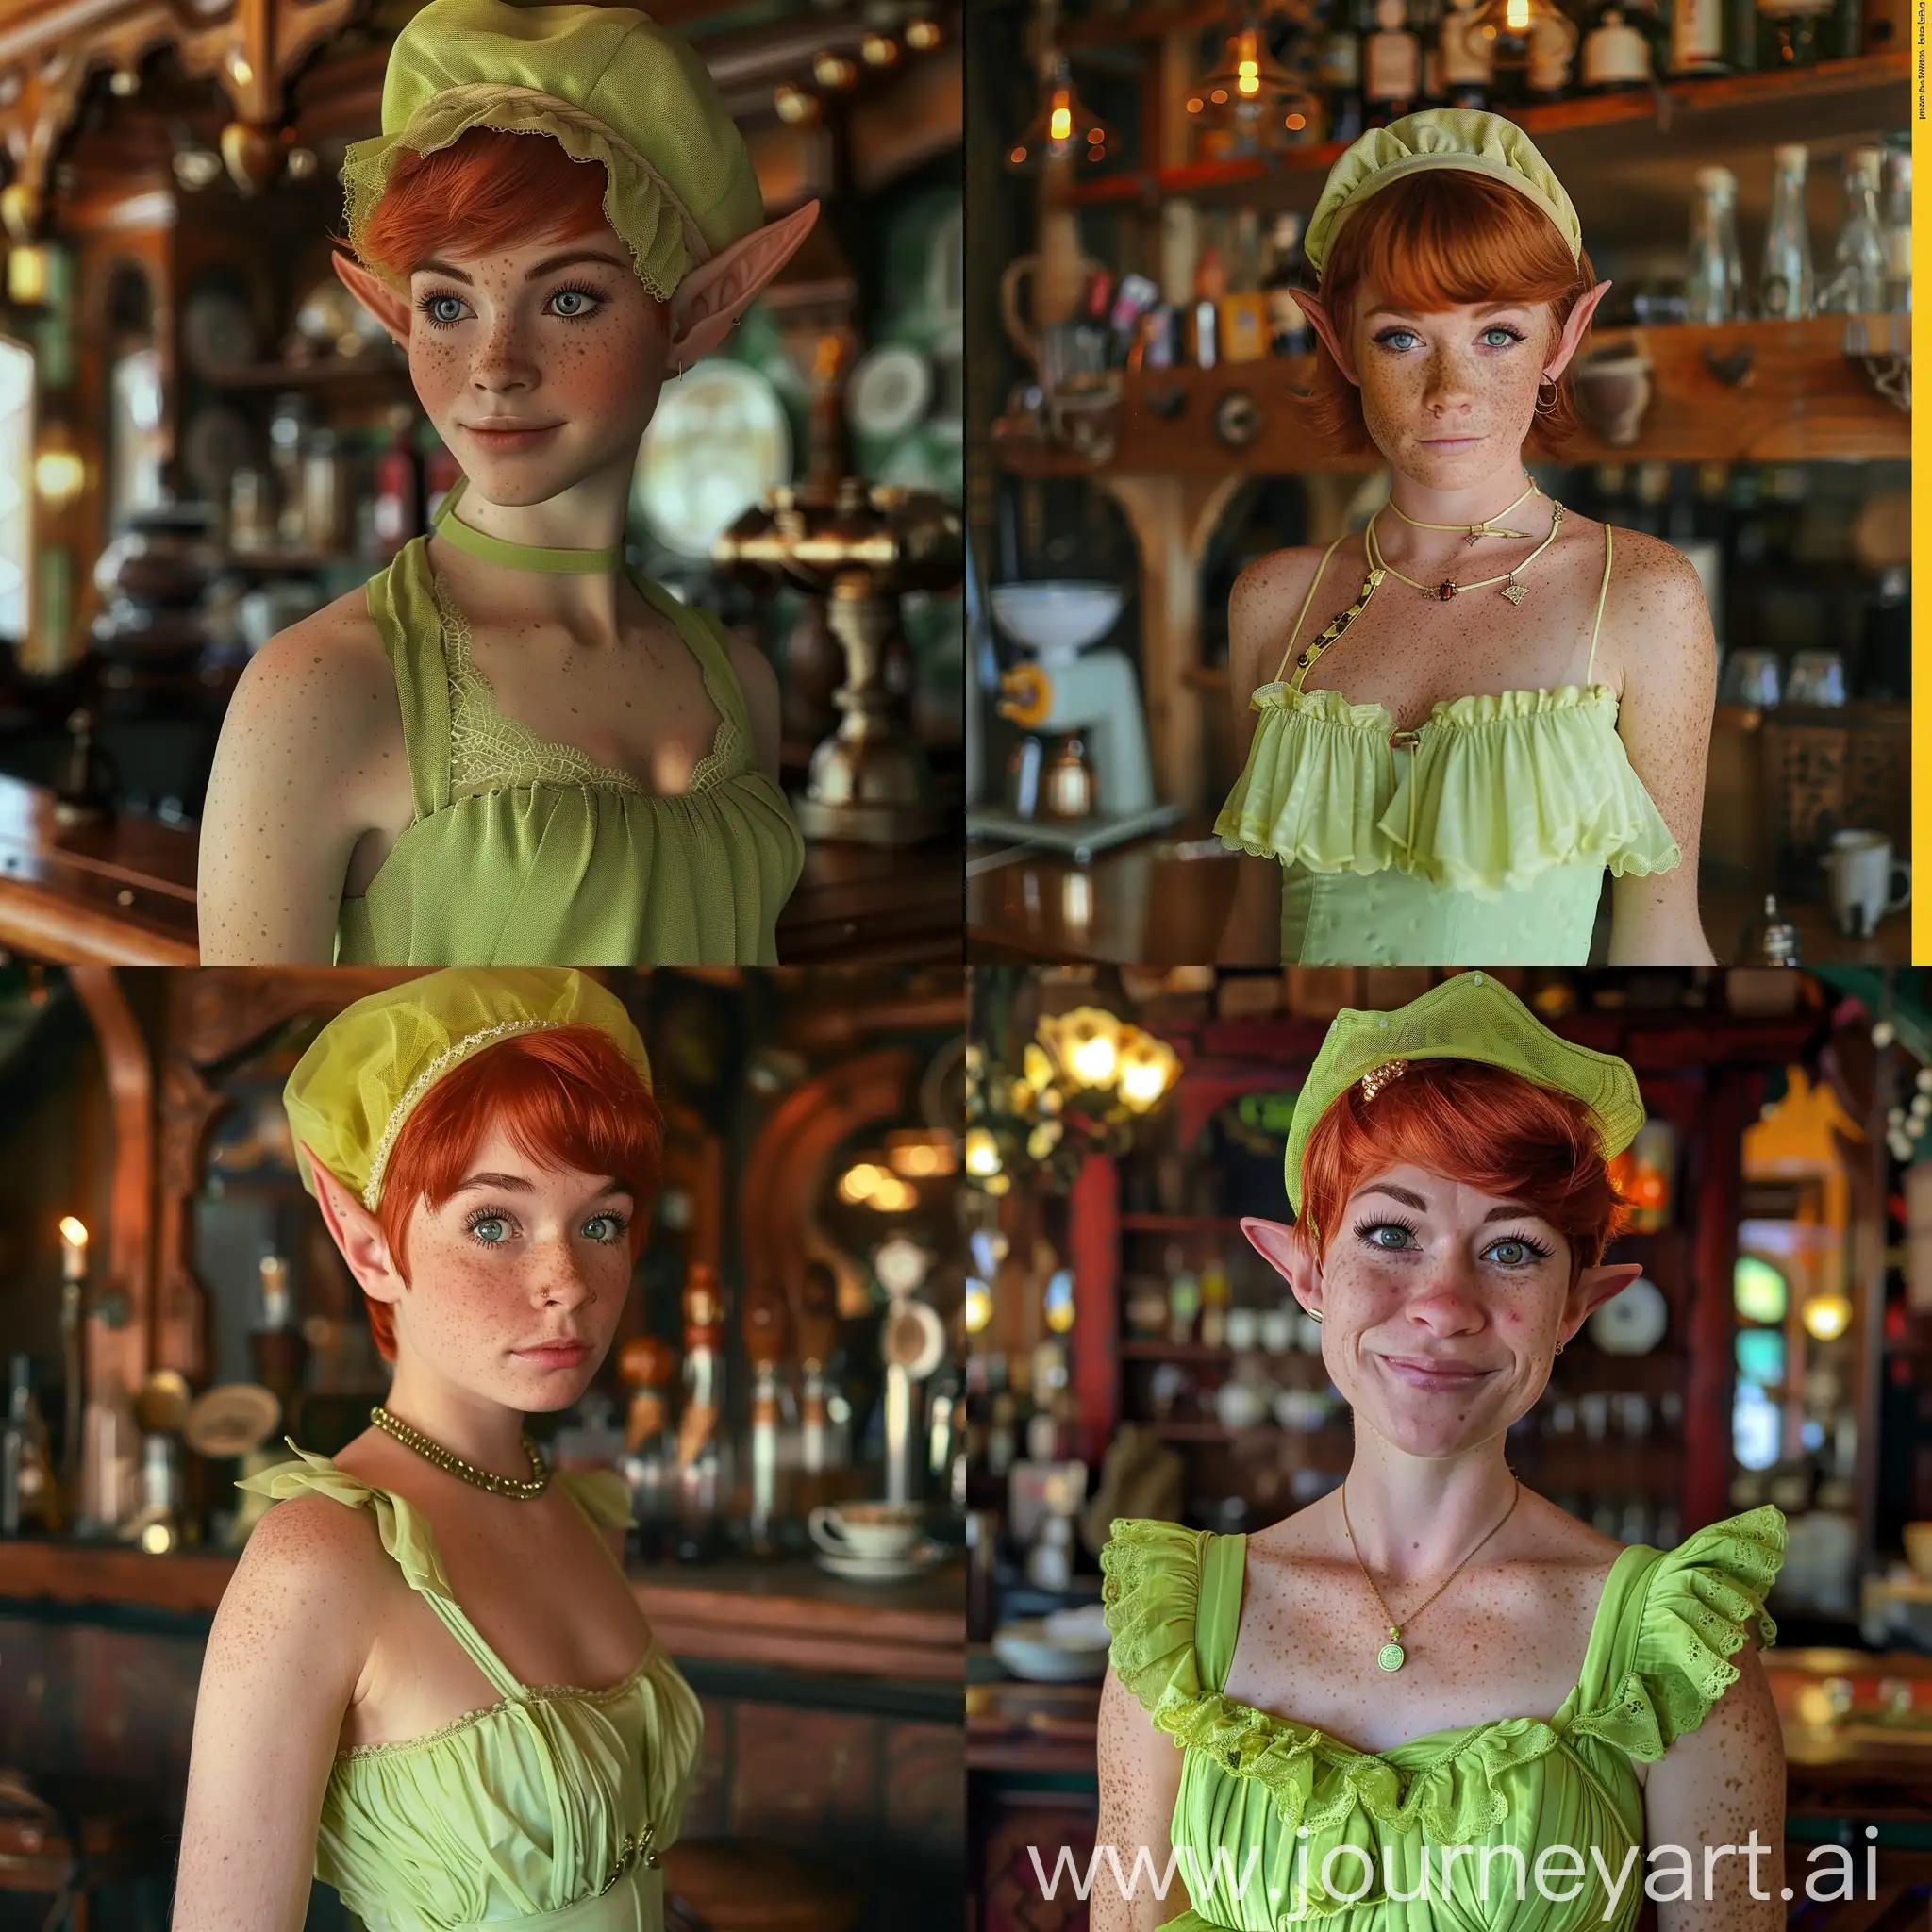 Freckled-Elf-Tea-Maid-in-Lime-Green-Dress-at-the-Tavern